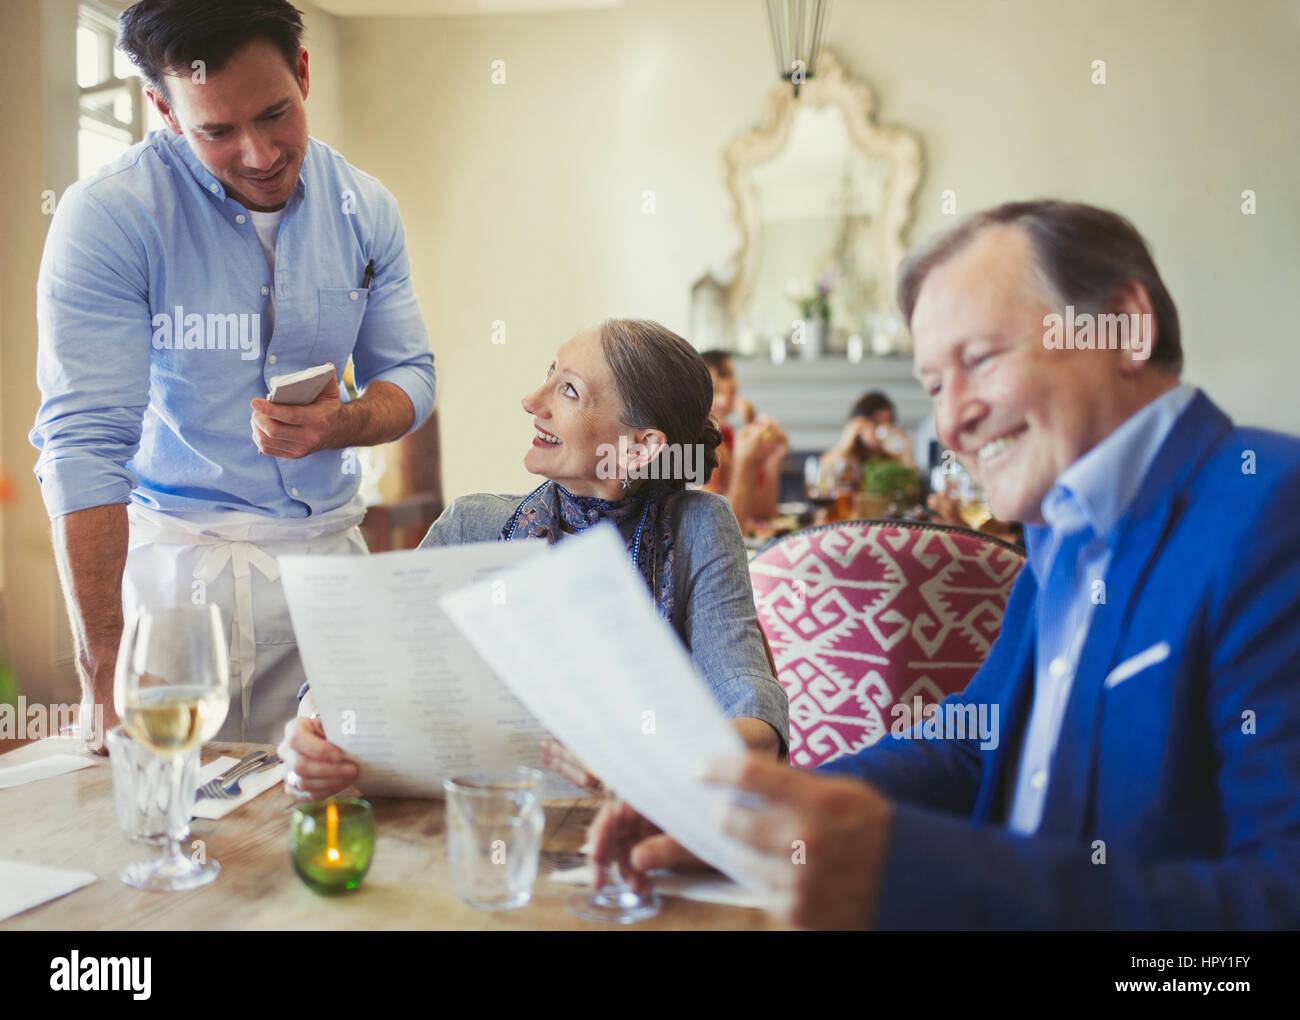 Waiter taking order from senior couple with menus at restaurant table Stock Photo